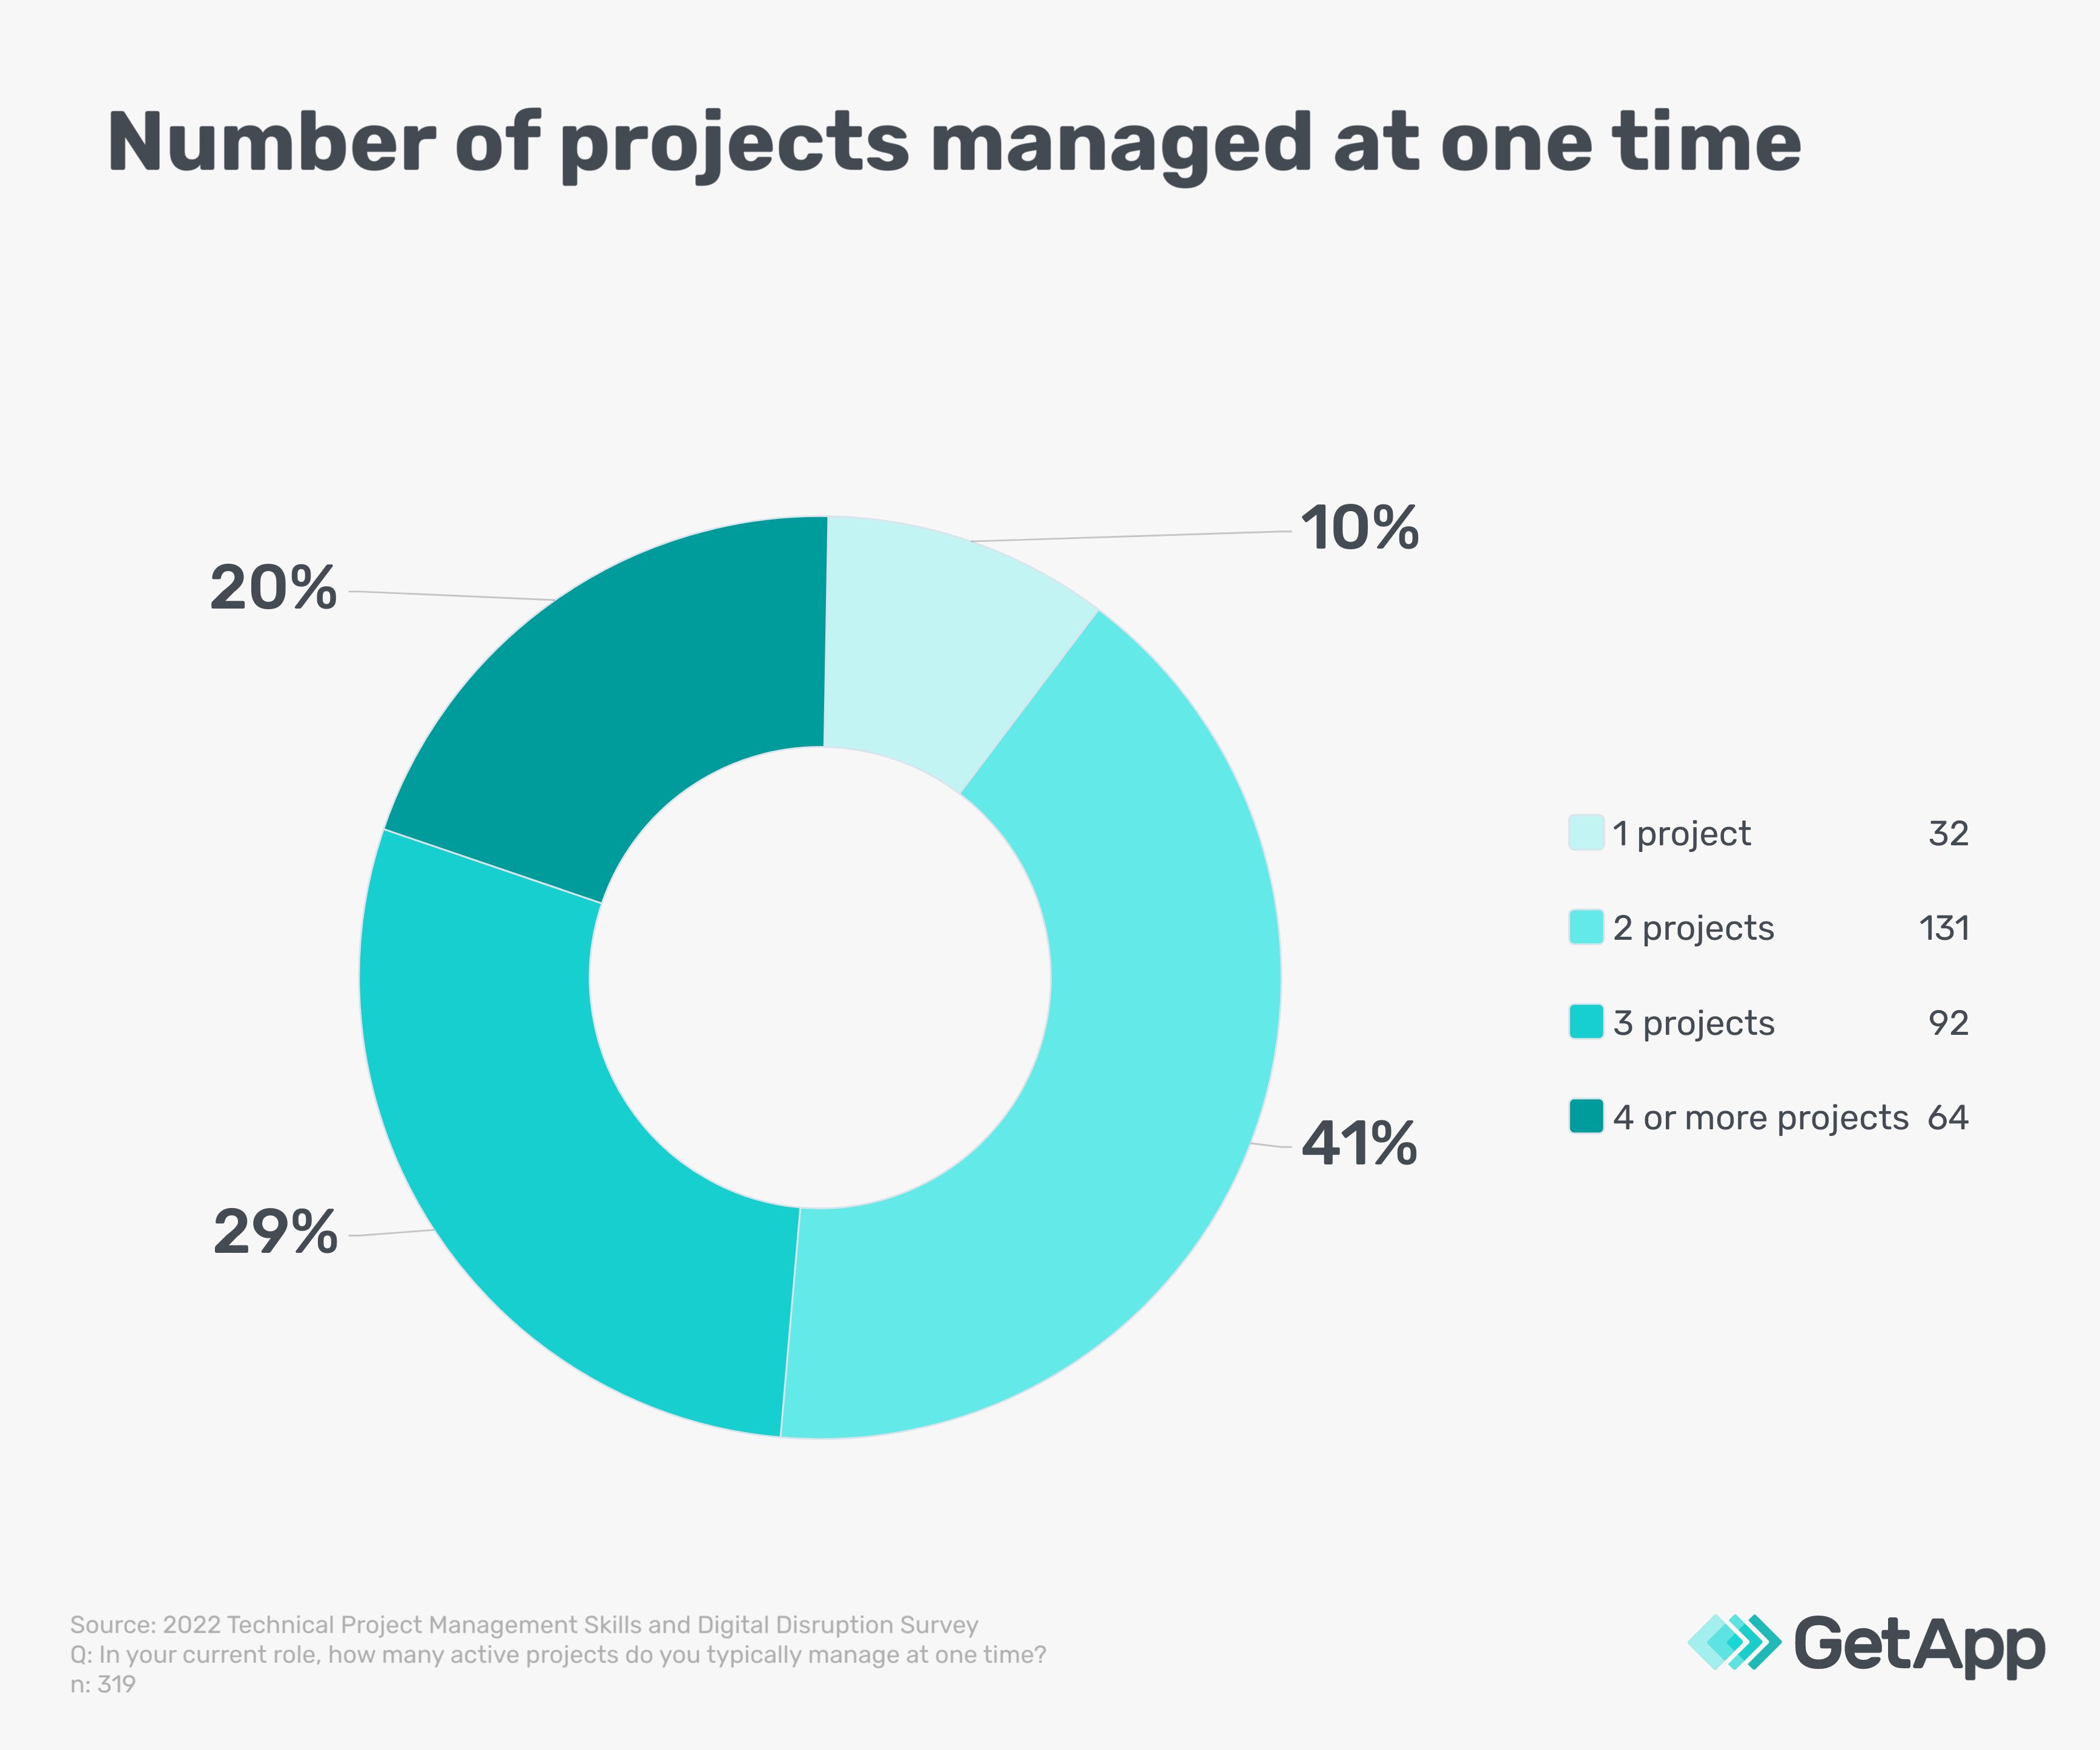 Number of projects managed at one time